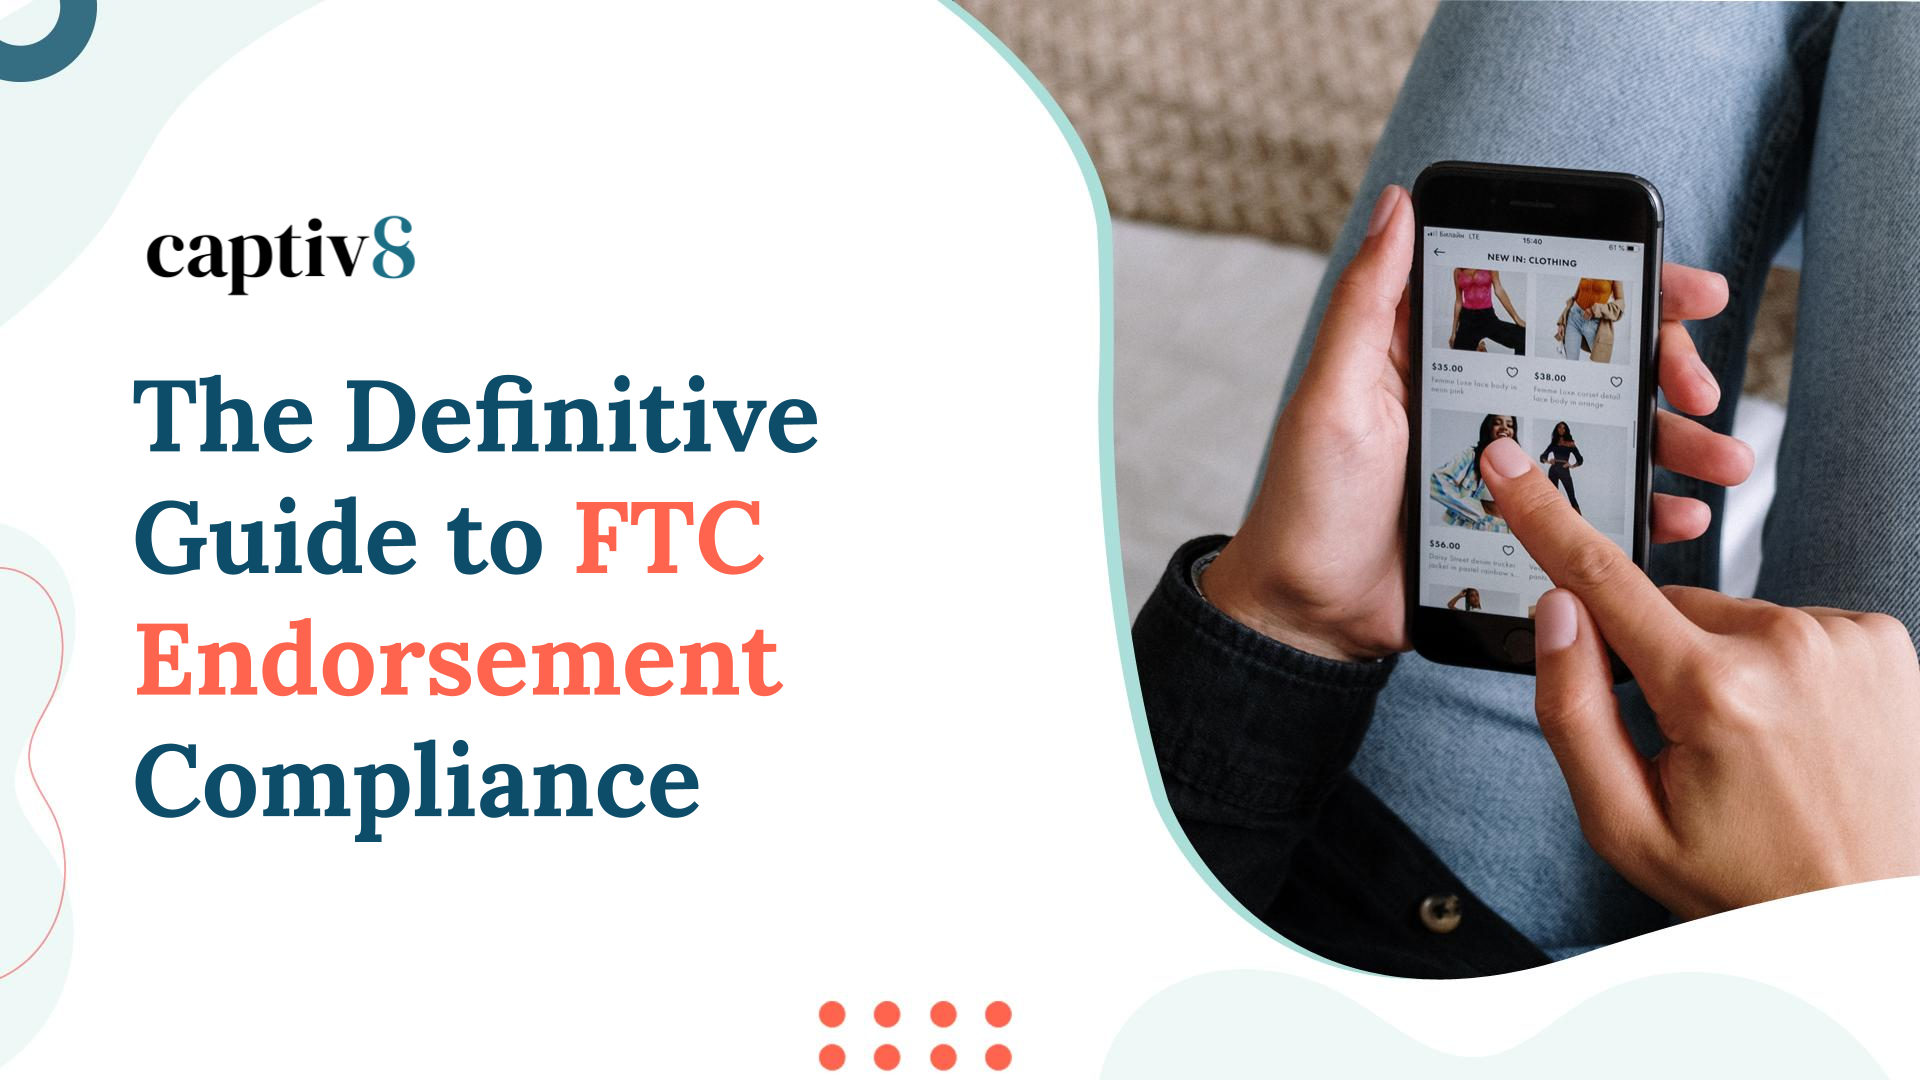 The Definitive Guide to FTC Endorsement Compliance